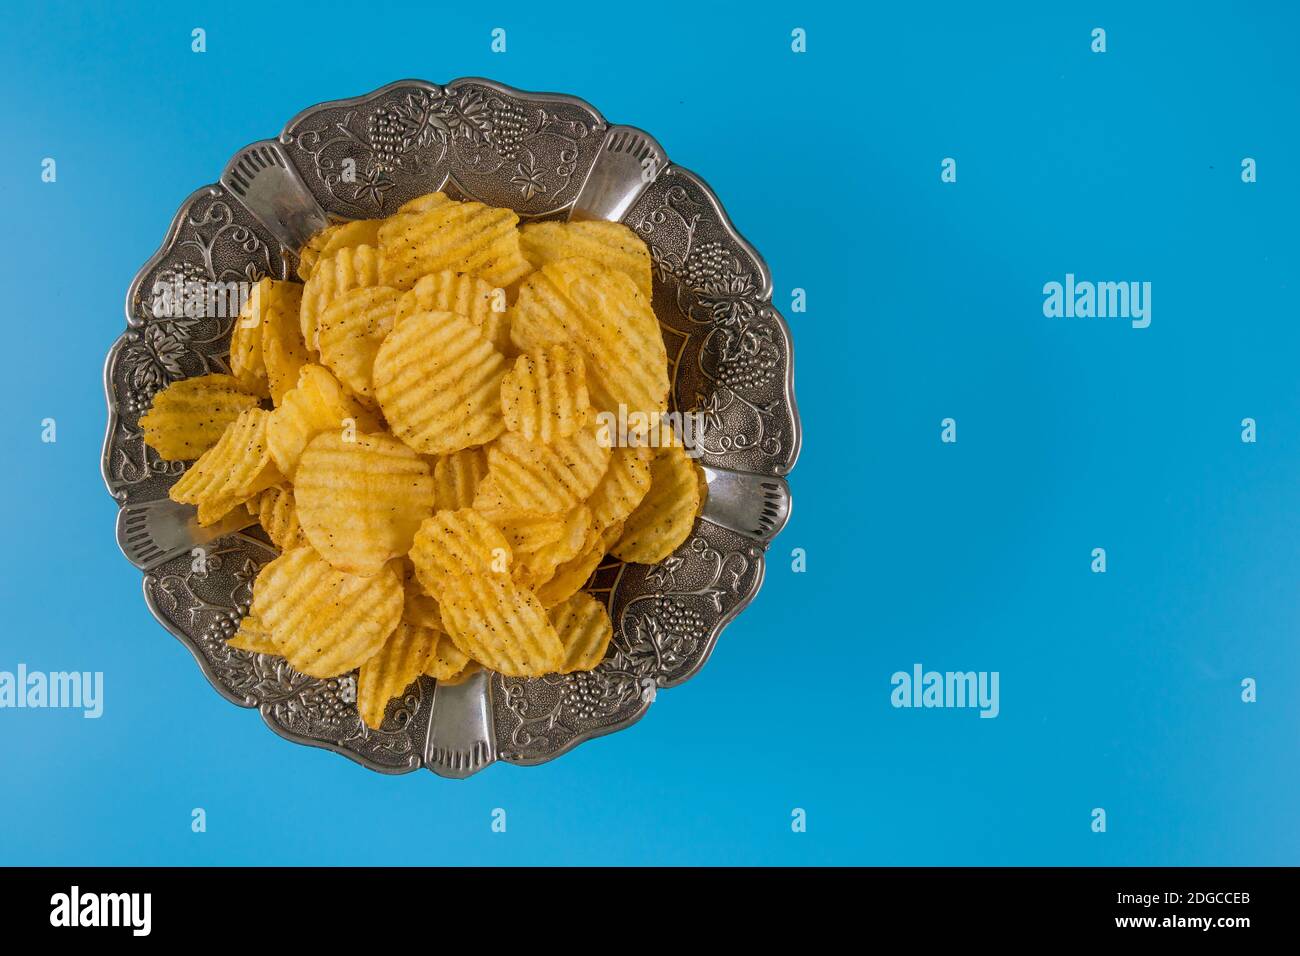 Potato chips in silver bowl on a blue background, top view. Stock Photo